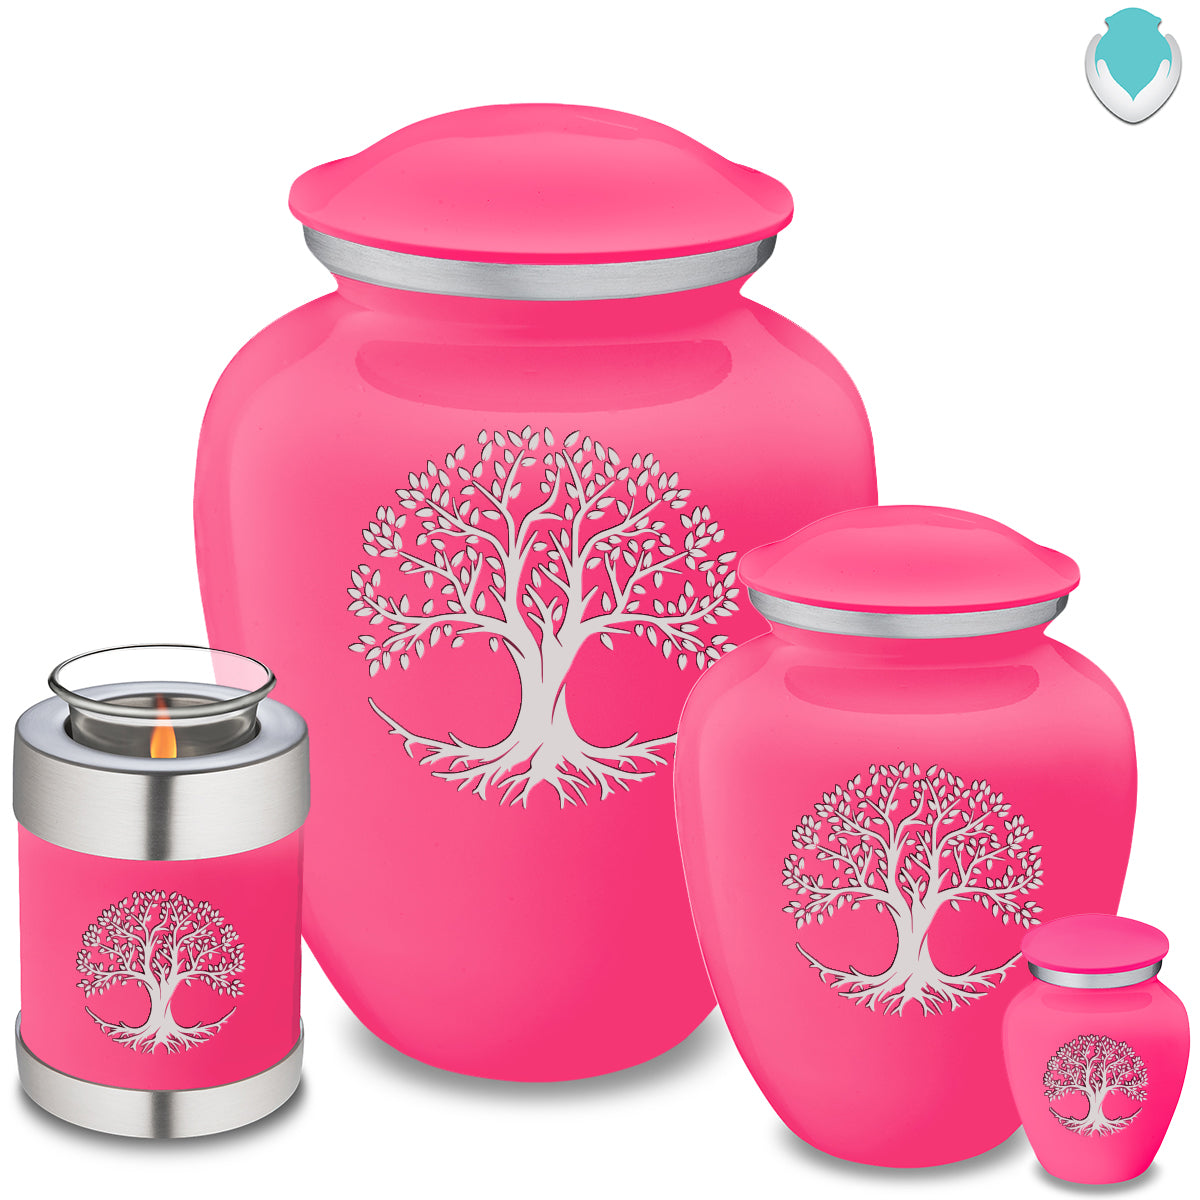 Candle Holder Embrace Bright Pink Tree of Life Cremation Urn